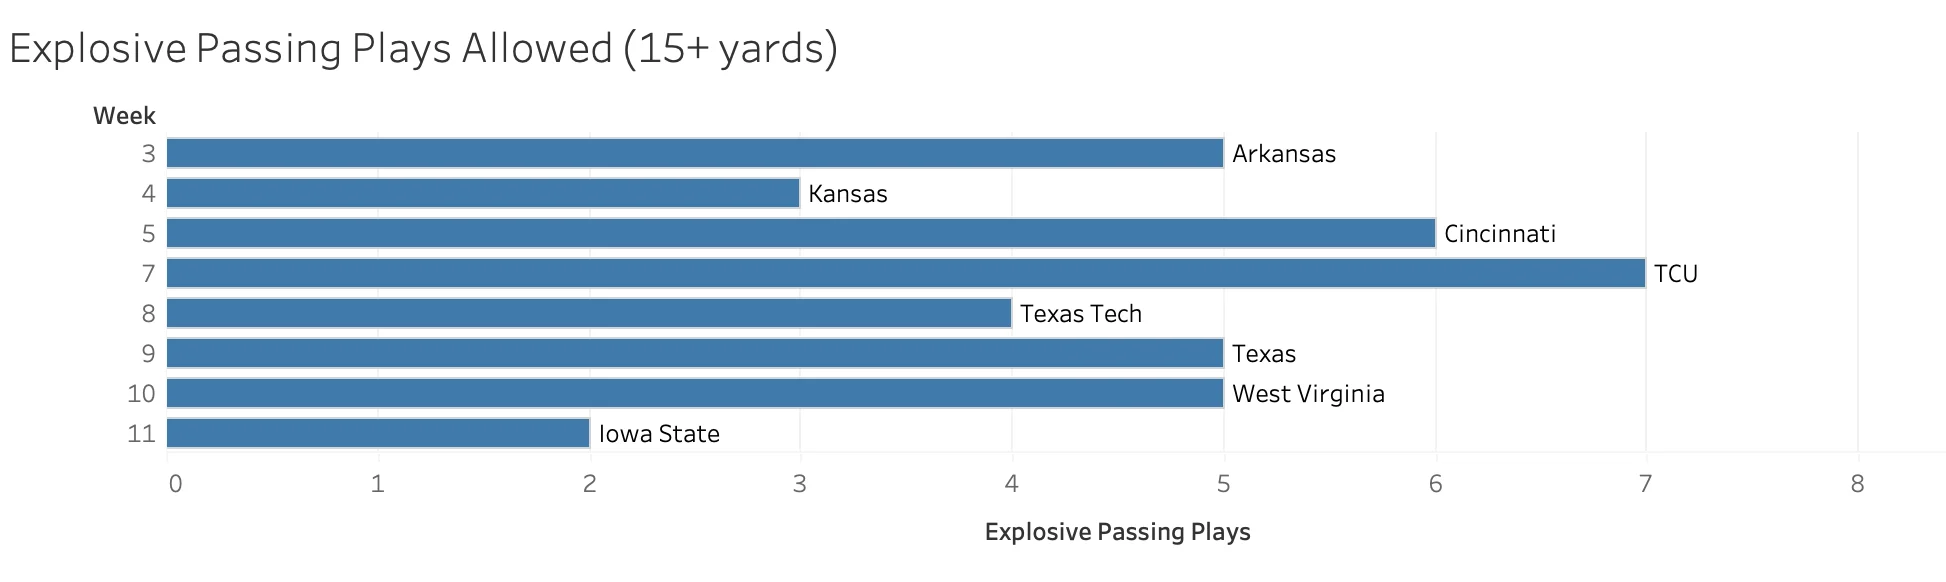 BYU explosive passing plays allowed